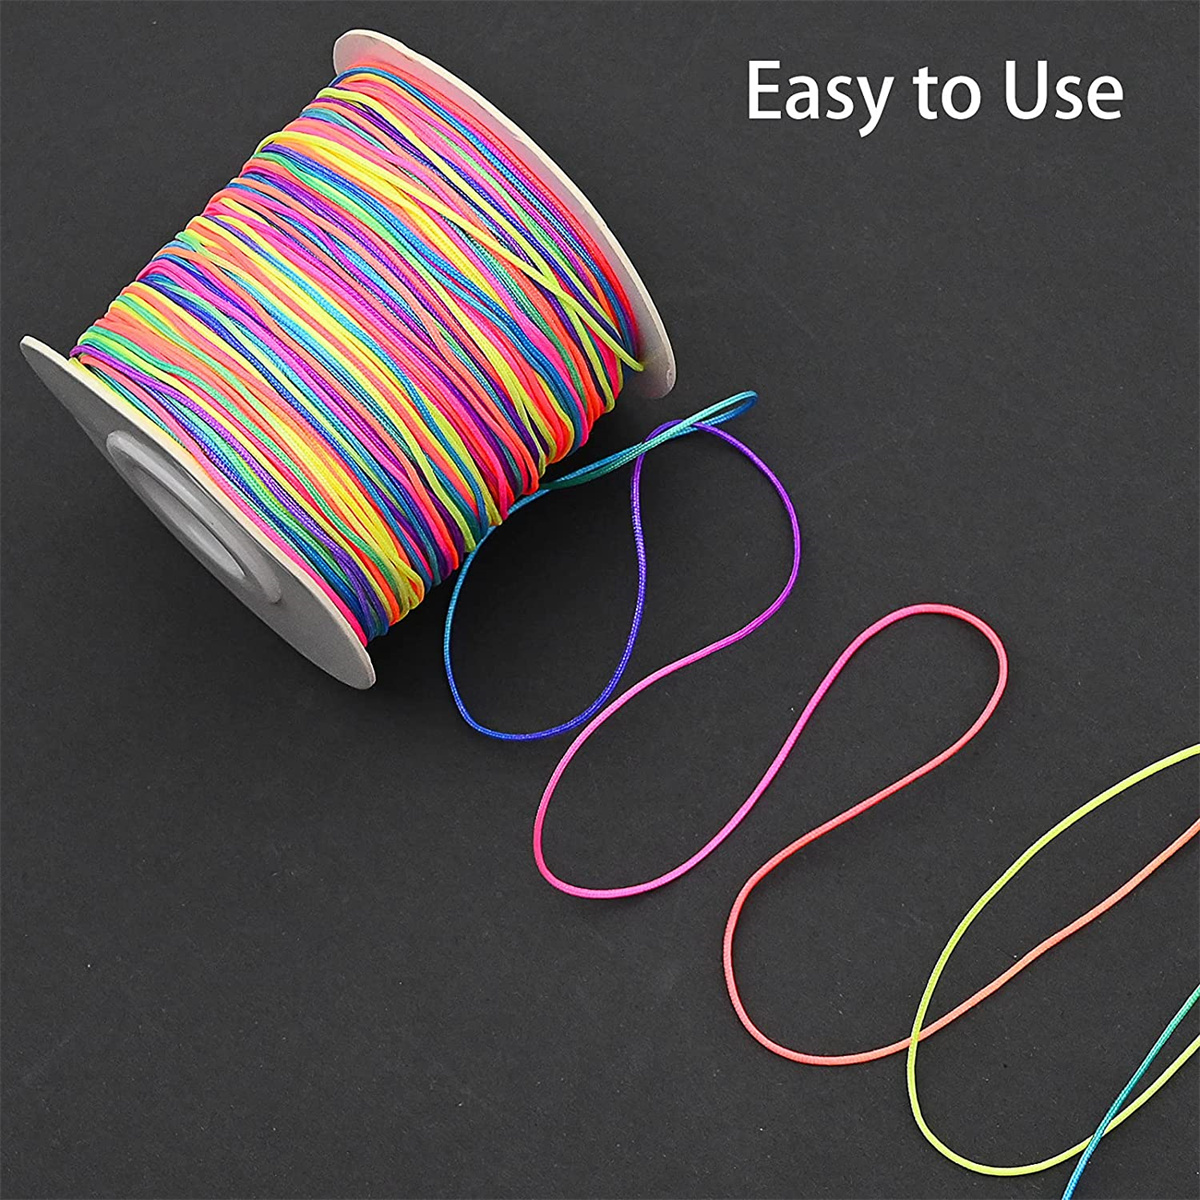 Casewin Elastic String for Pony Beads for Kids, 1mm Rainbow Elastic Cord  String for Bracelet Making, Colorful Stretchy Cord for Jewelry Making, 100m